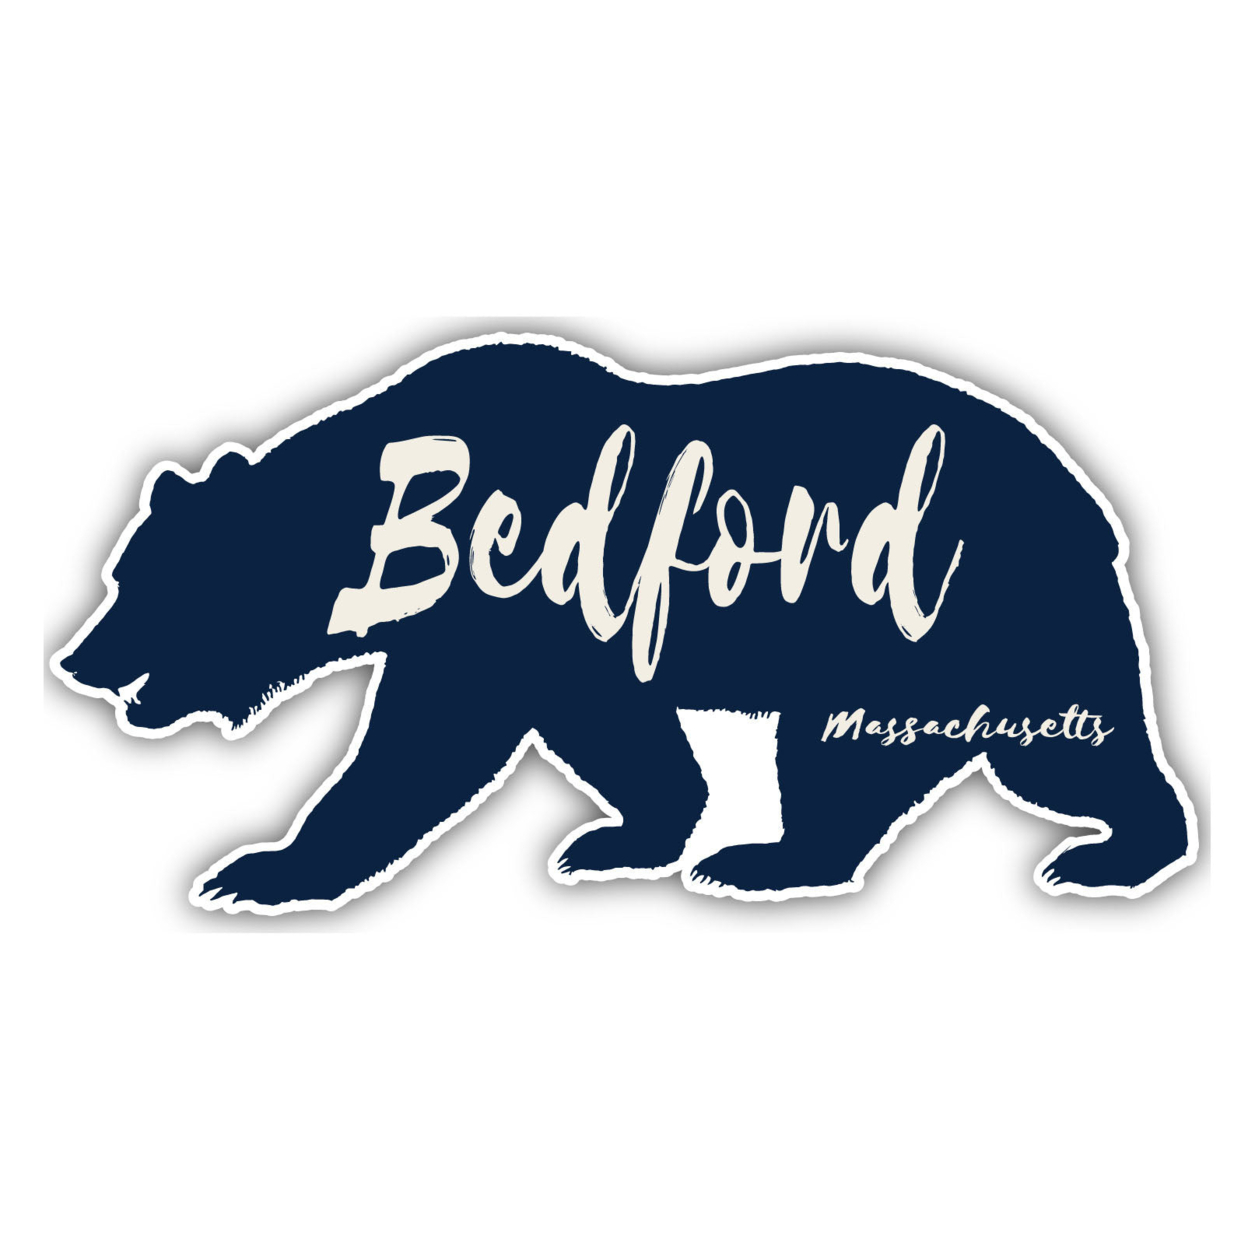 Bedford Massachusetts Souvenir Decorative Stickers (Choose Theme And Size) - 4-Pack, 10-Inch, Bear